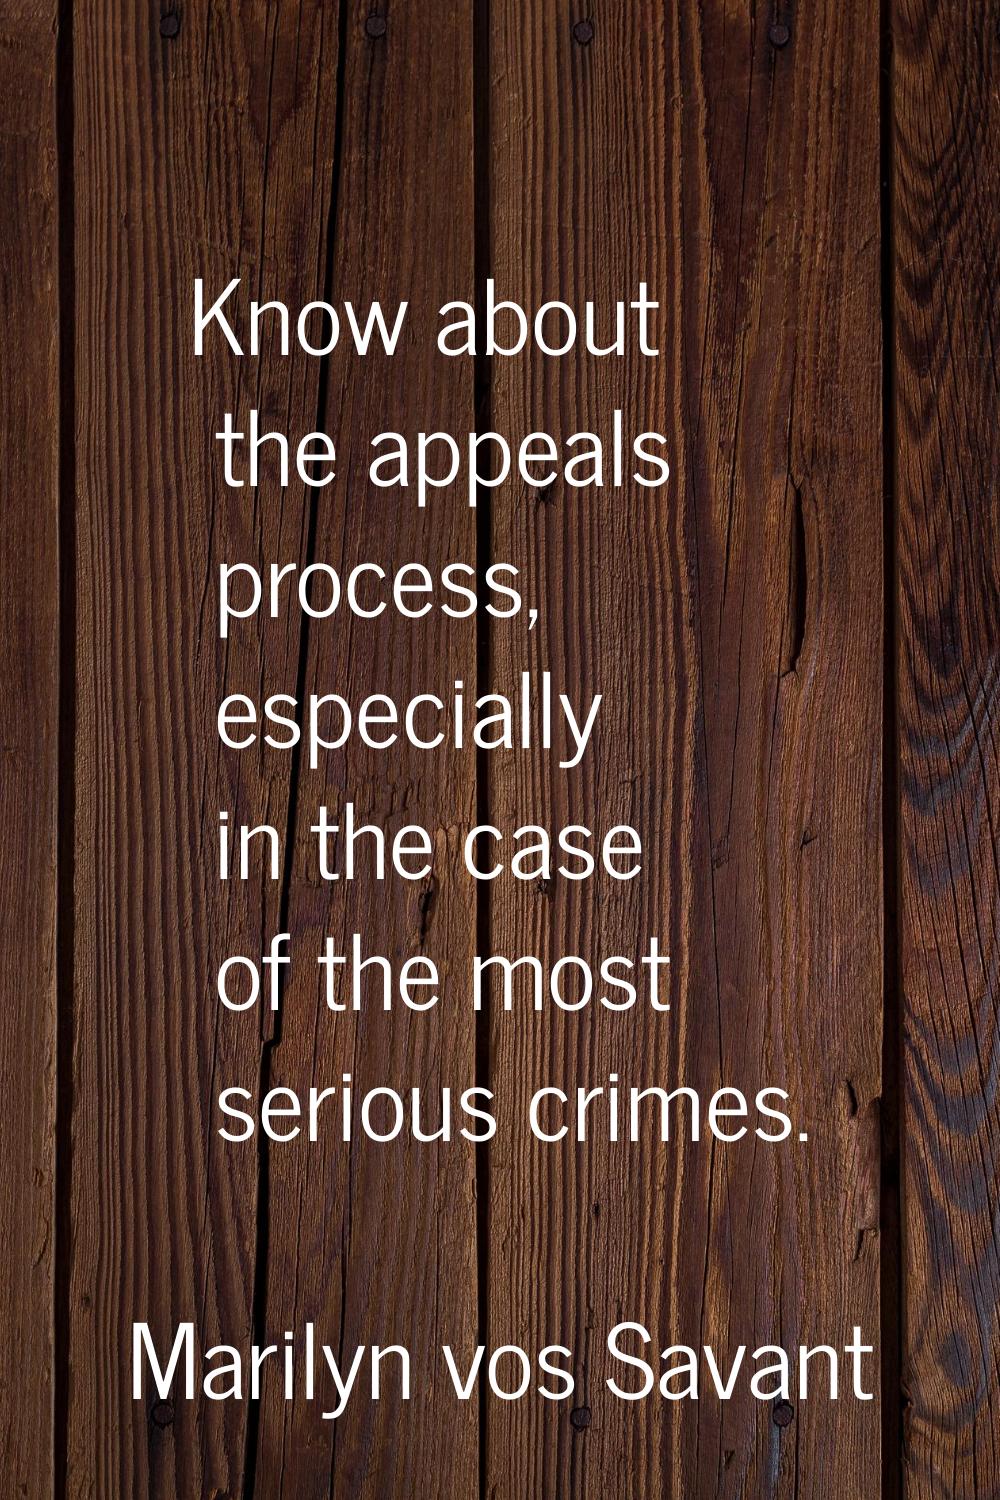 Know about the appeals process, especially in the case of the most serious crimes.